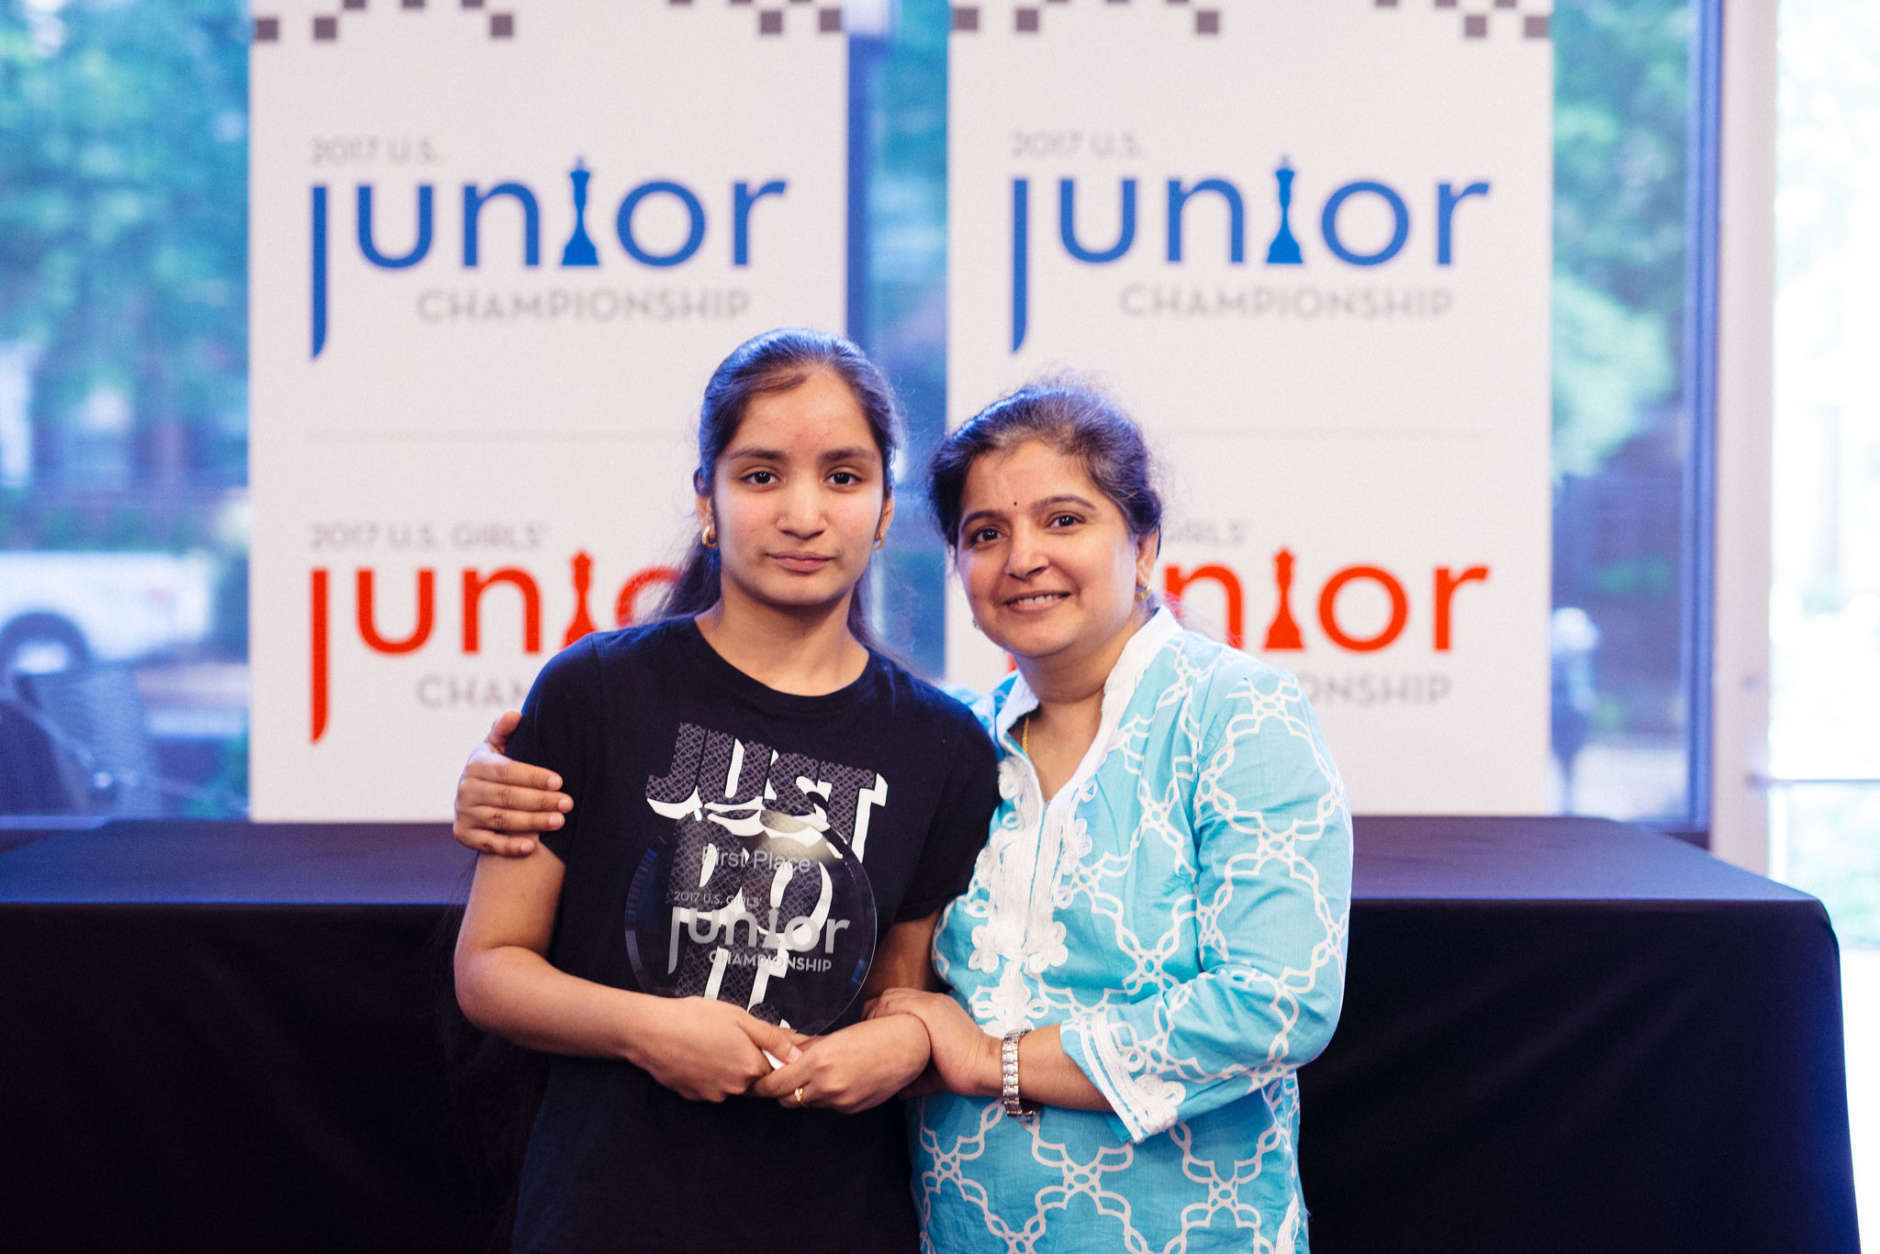 Akshita Gorti poses with her first place trophy alongside her mother. (Austin Fuller/Chess Club and Scholastic Center of St. Louis)